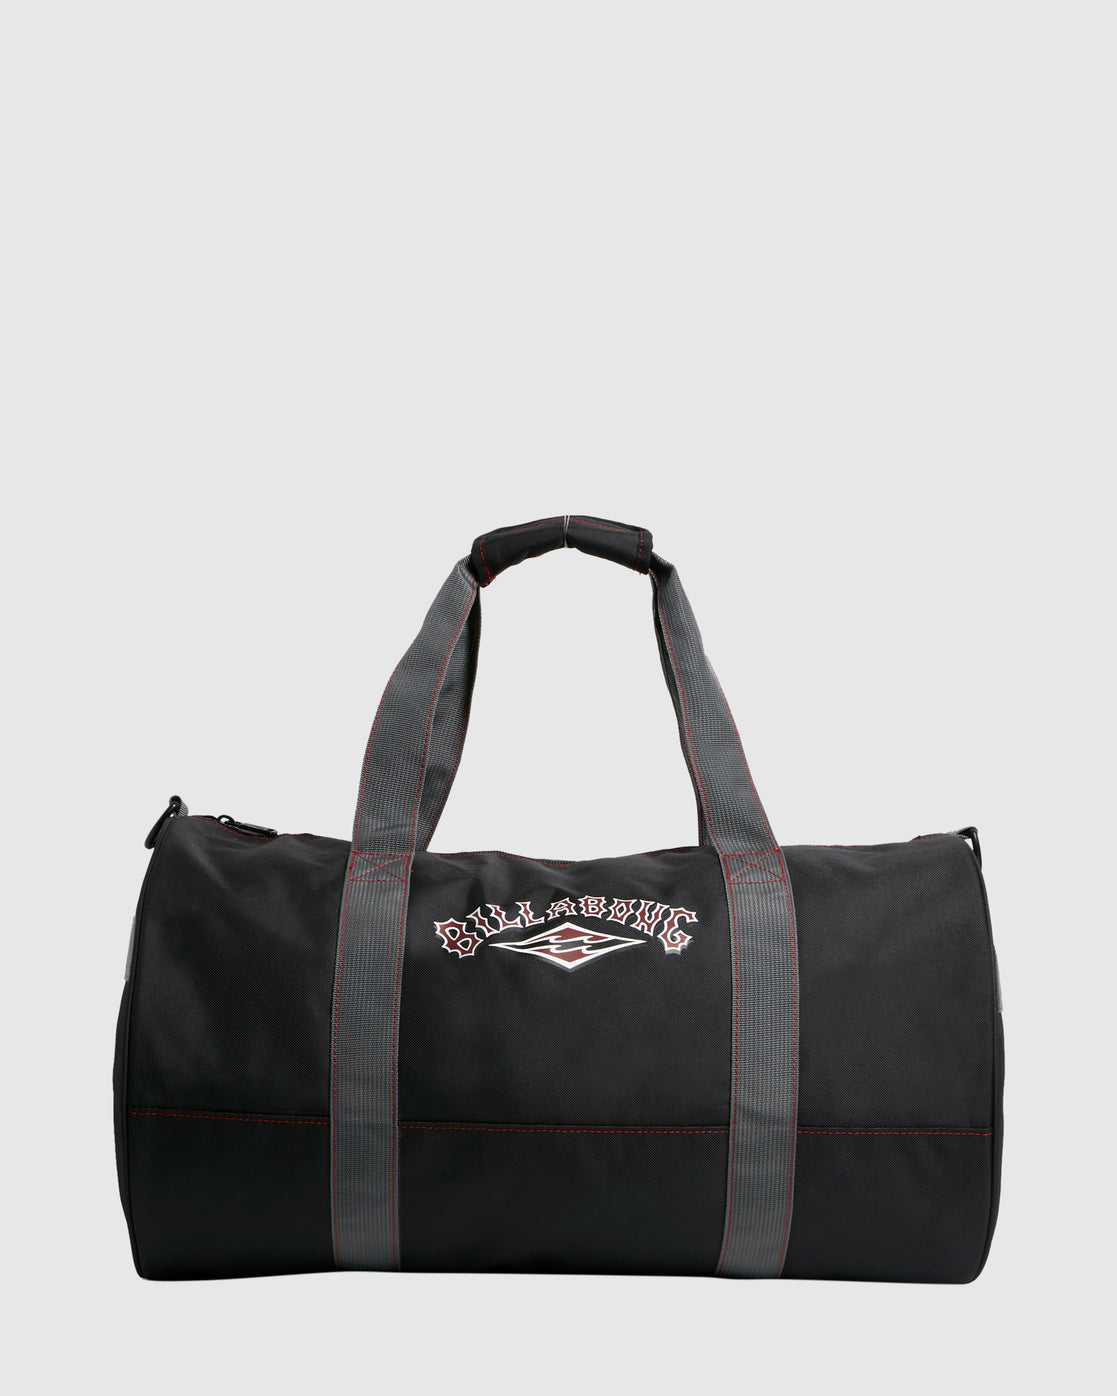 Billabong Traditional Duffle Bag in black colourway